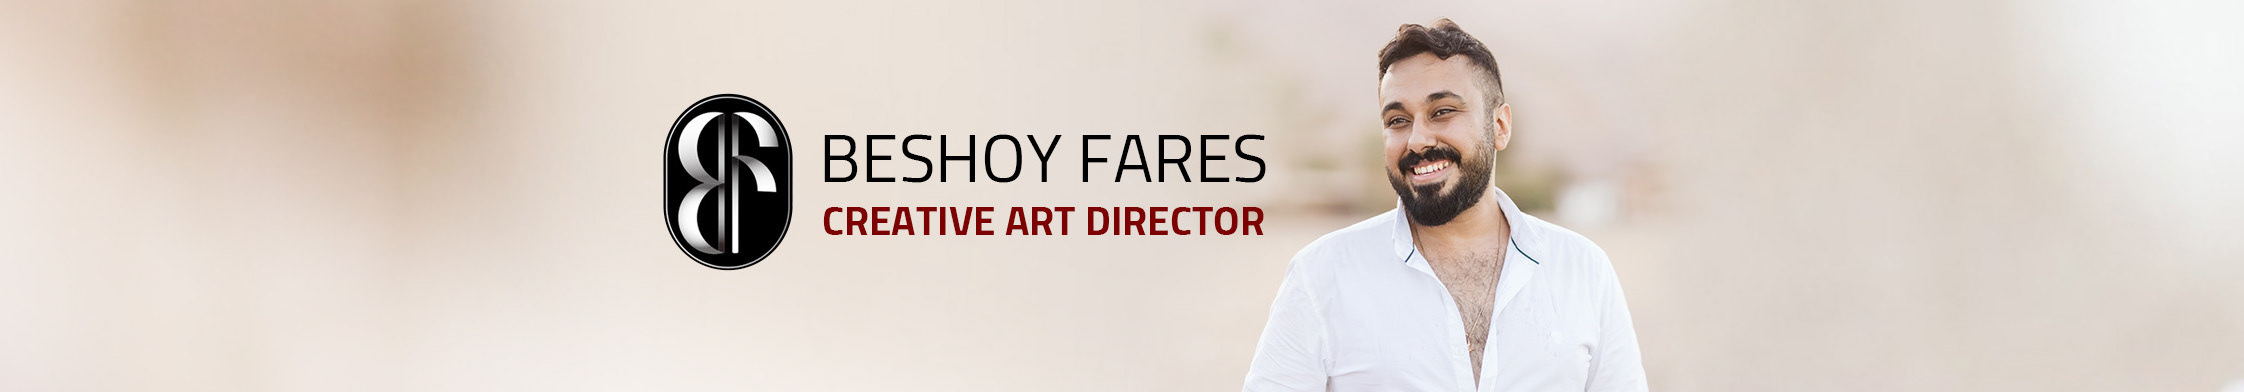 Beshoy Fares's profile banner